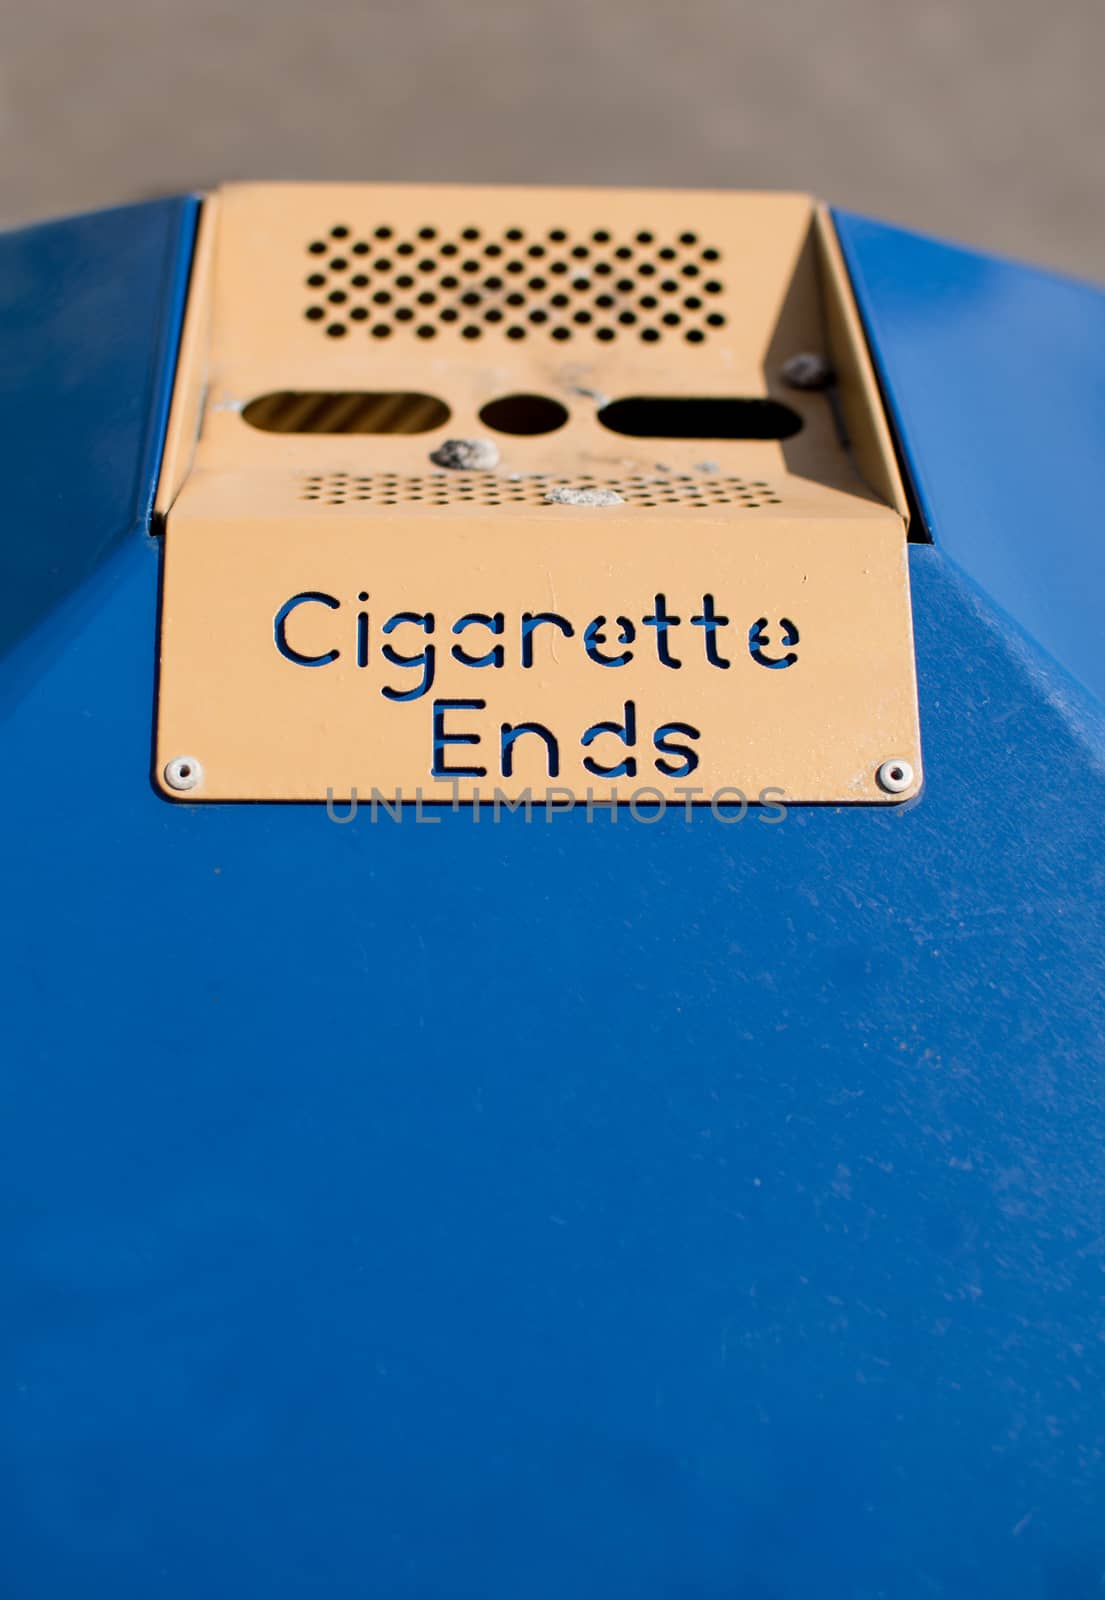 A sign on a public litter bin, with the words Cigarette Ends